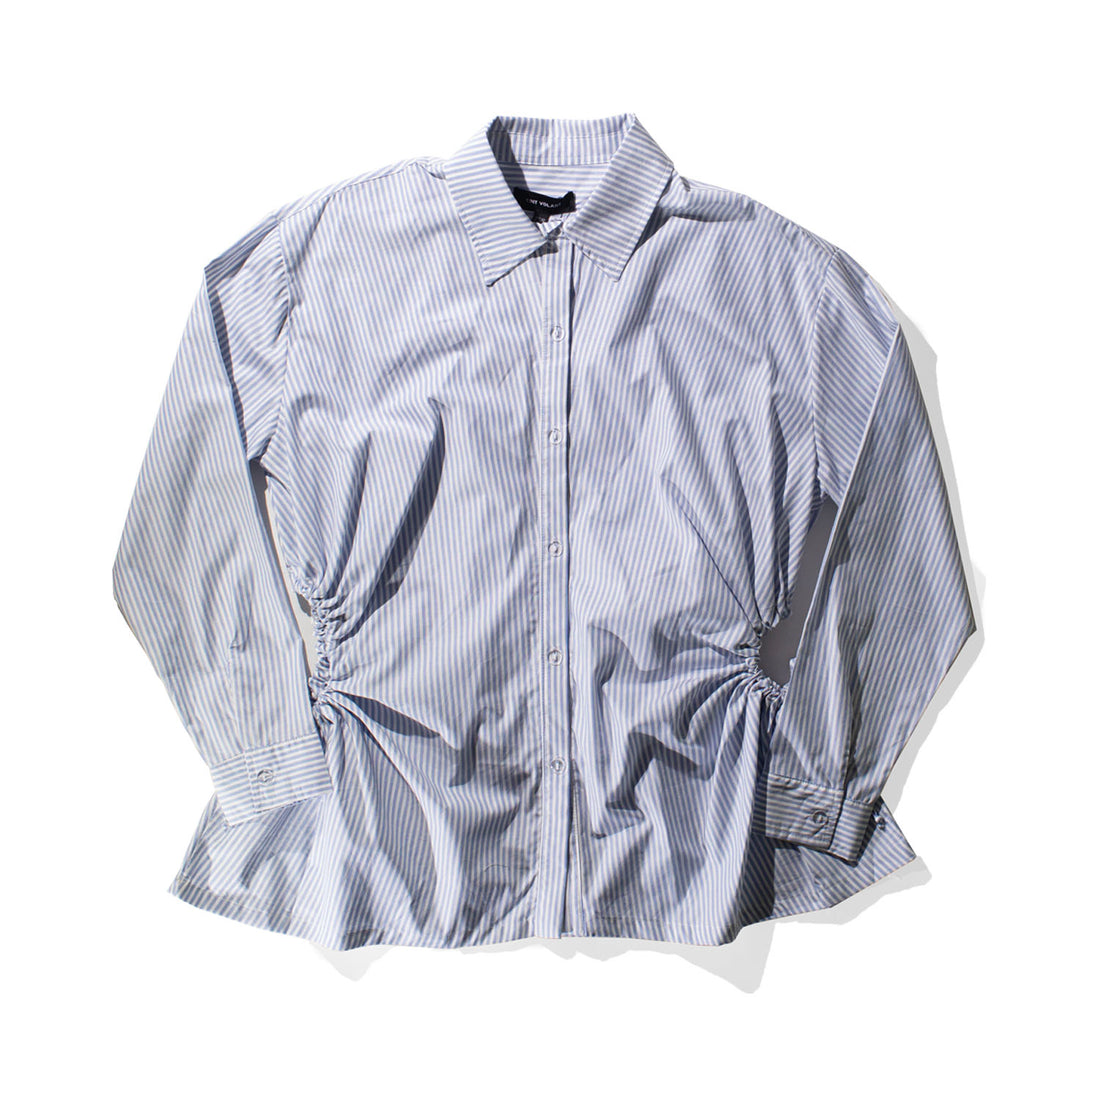 Toit Volant Cicely Shirt in Blue White